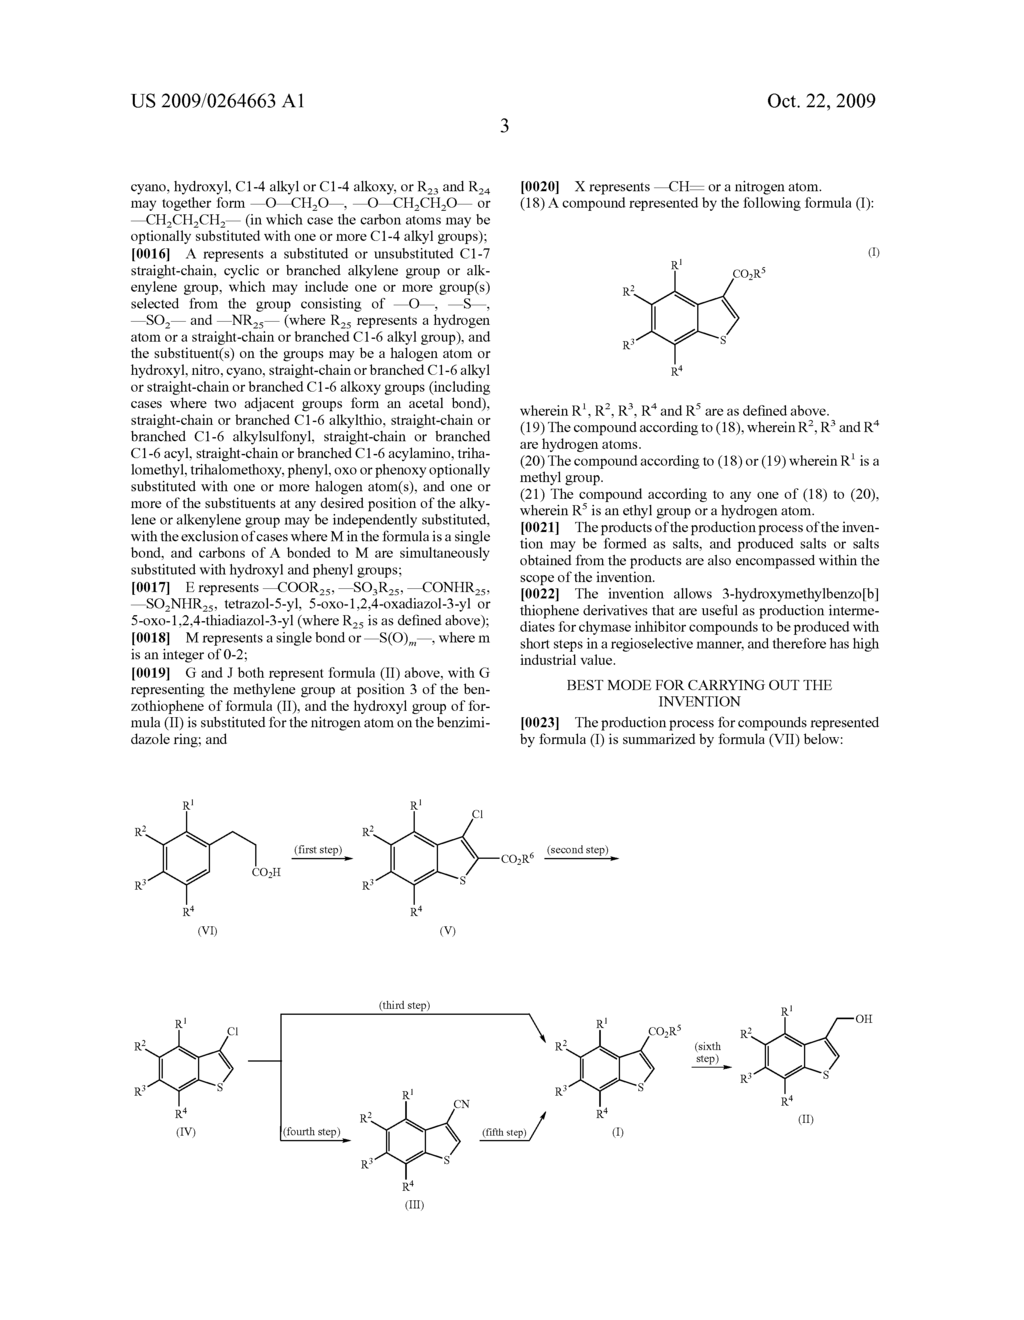 3-HYDROXYMETHYLBENZO[b]THIOPHENE DERIVATIVES AND PROCESS FOR THEIR PRODUCTION - diagram, schematic, and image 04